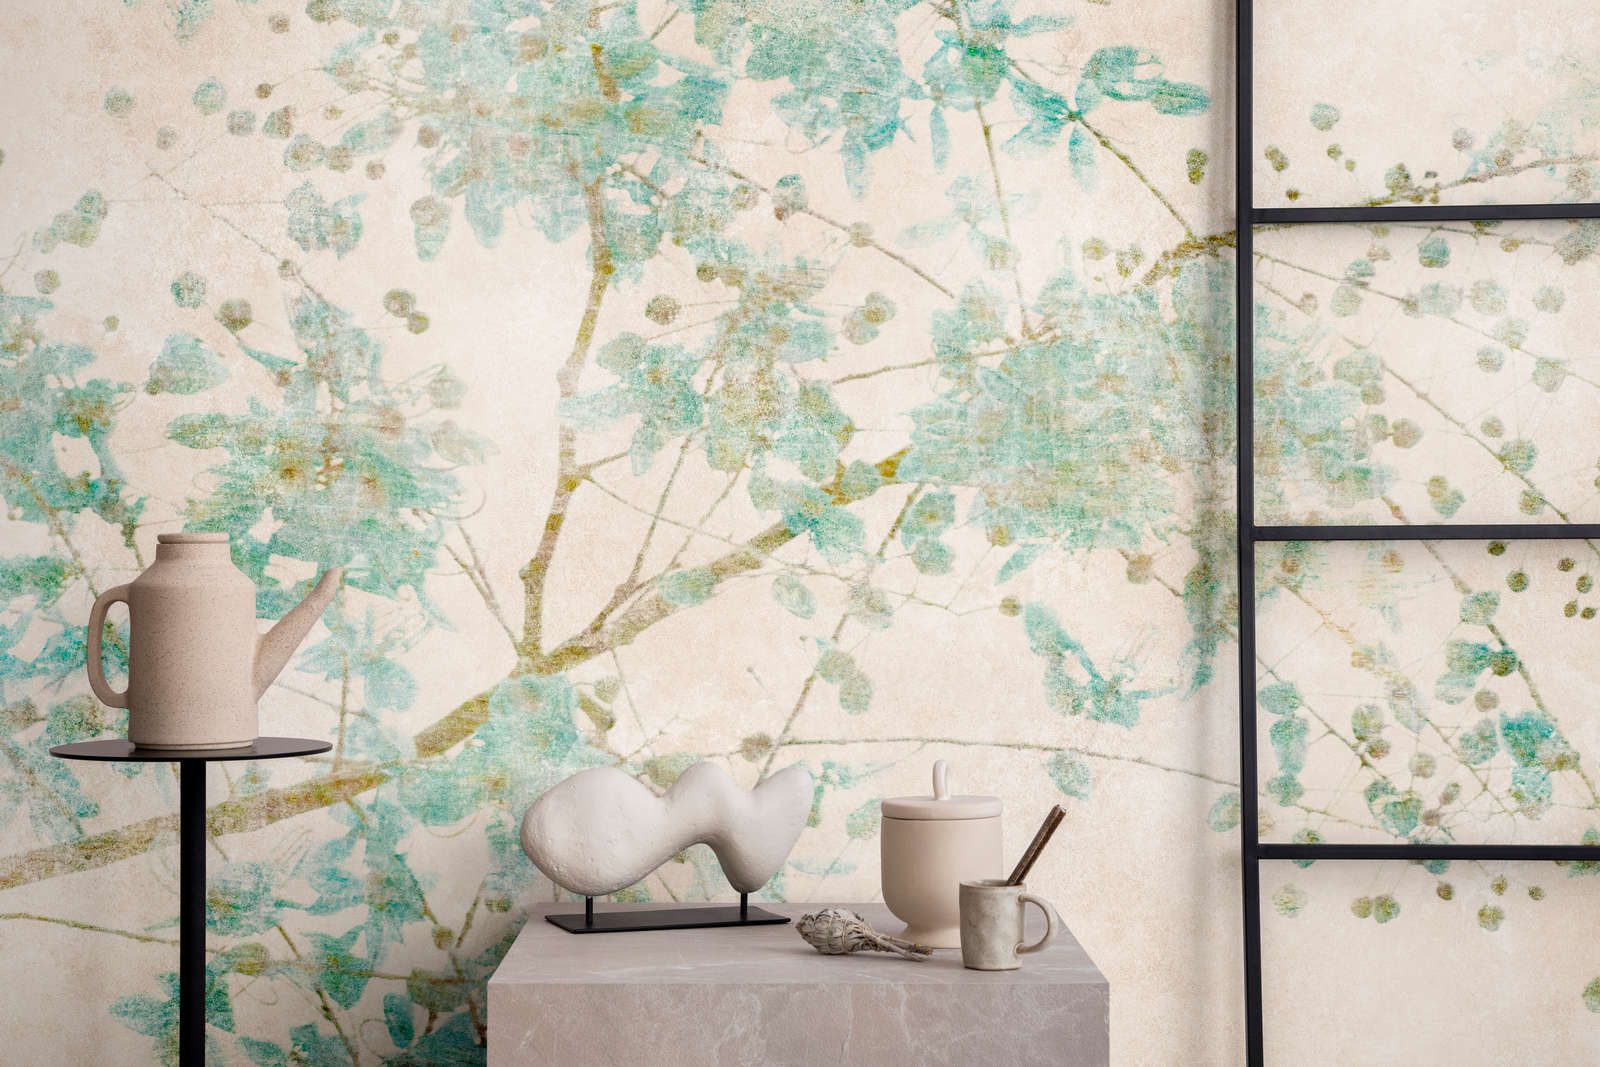             Photo wallpaper »nikko« - Branches in pale colours with vintage plaster texture in the background - Lightly textured non-woven fabric
        